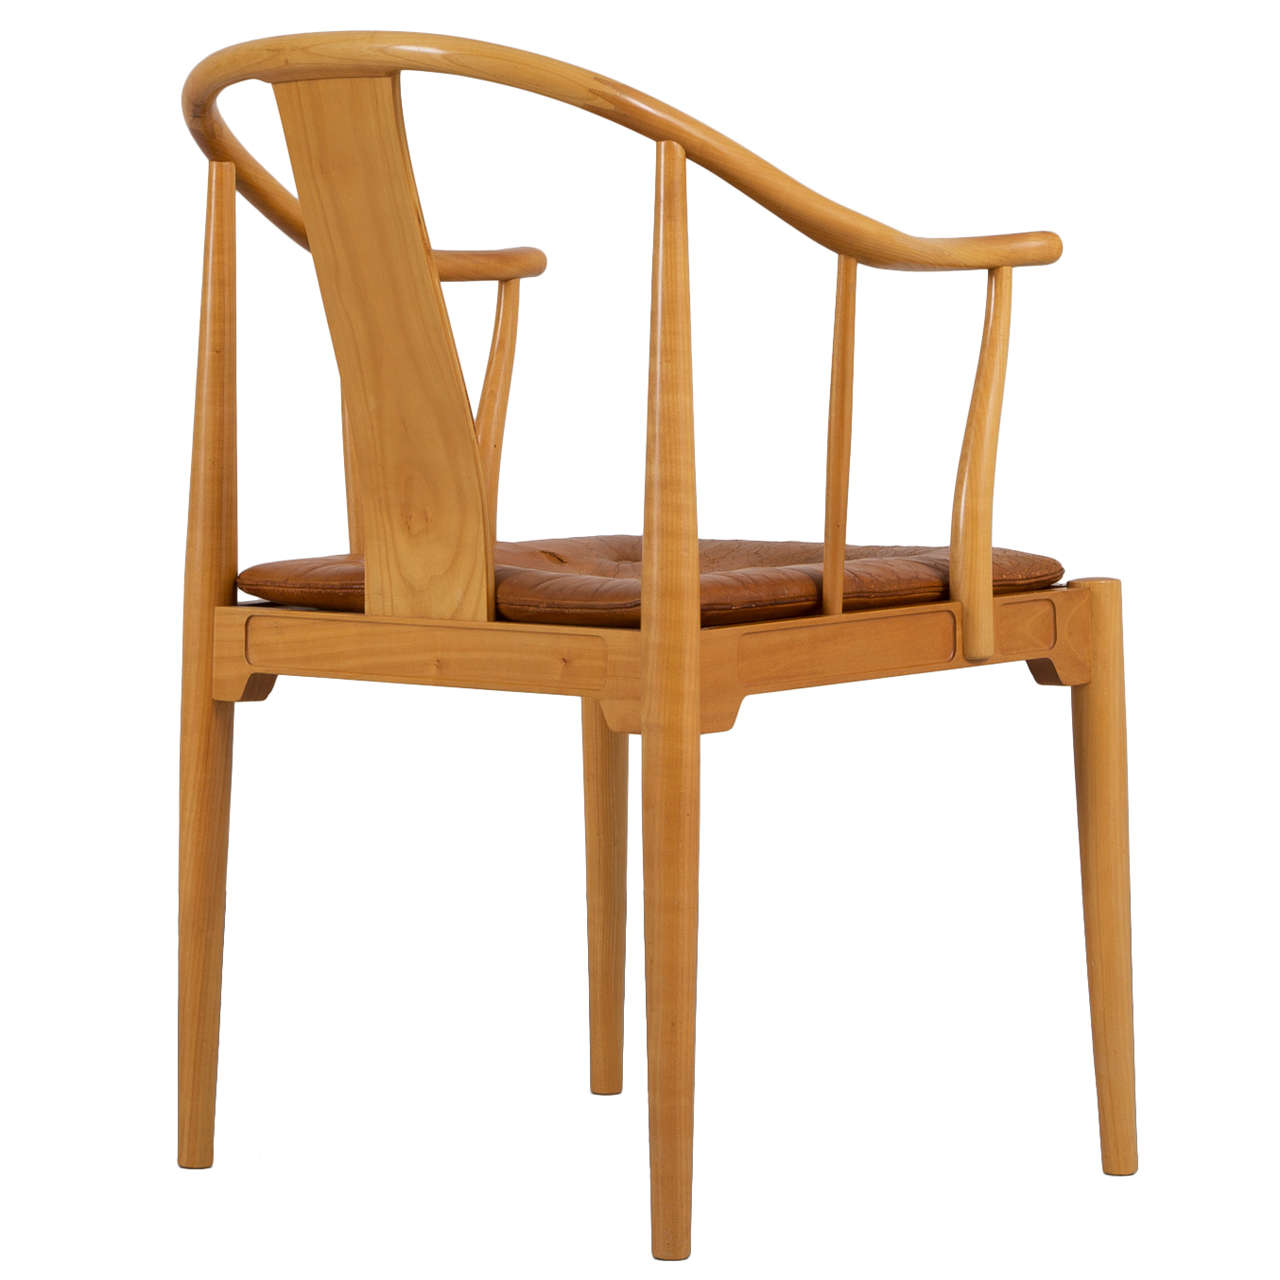 Early China chair by Hans Wegner for Fritz Hansen